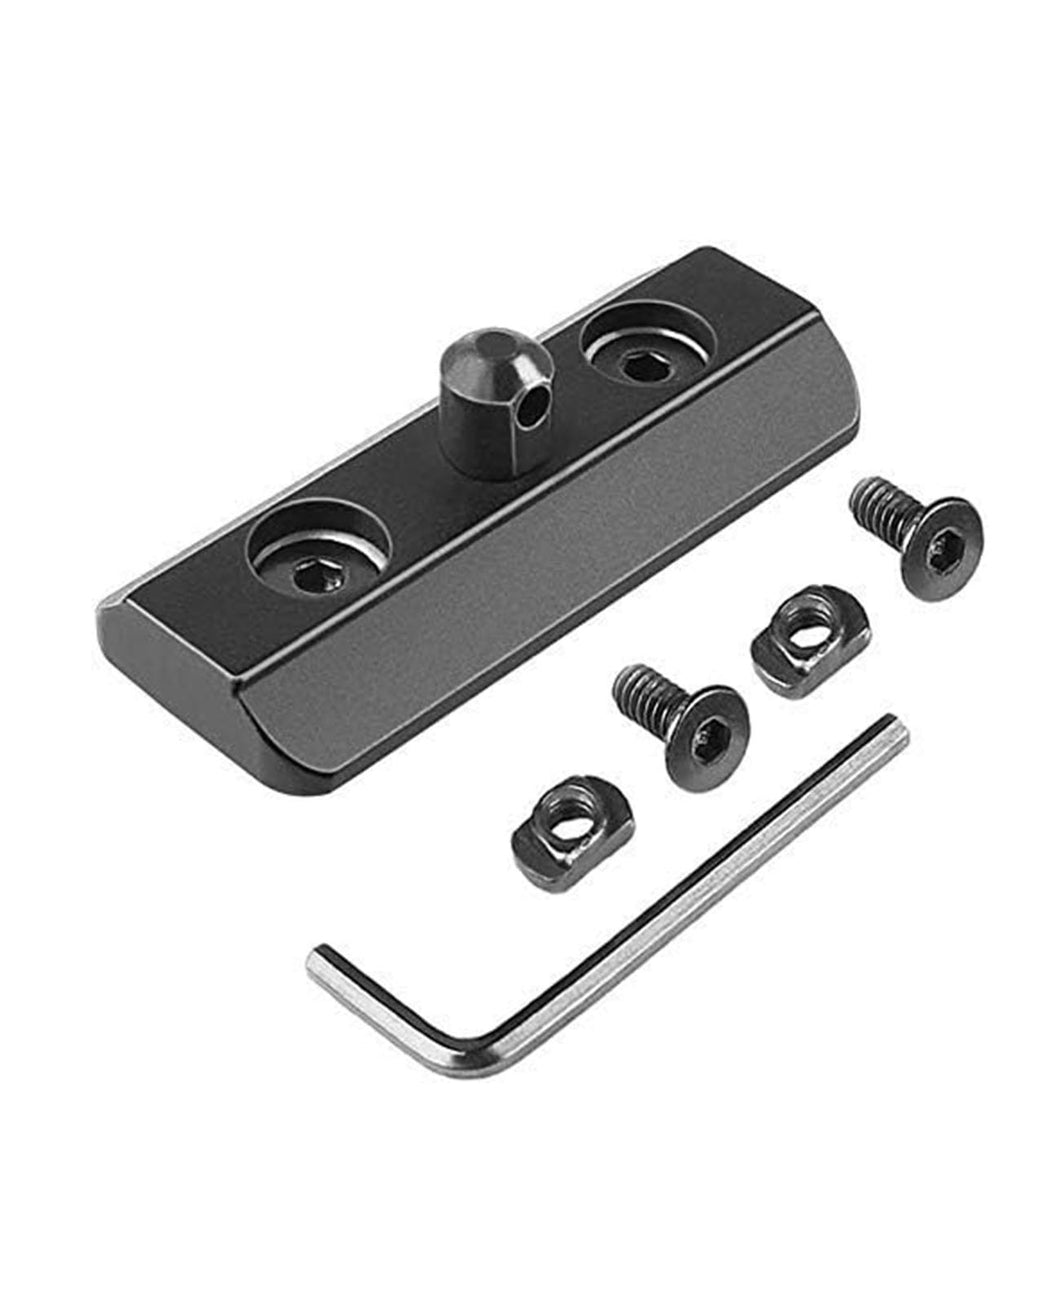 MidTen Bipod Adapter Bipod Mount Sling Stud 4 T-Nuts 4 Screws and 1 Wrench